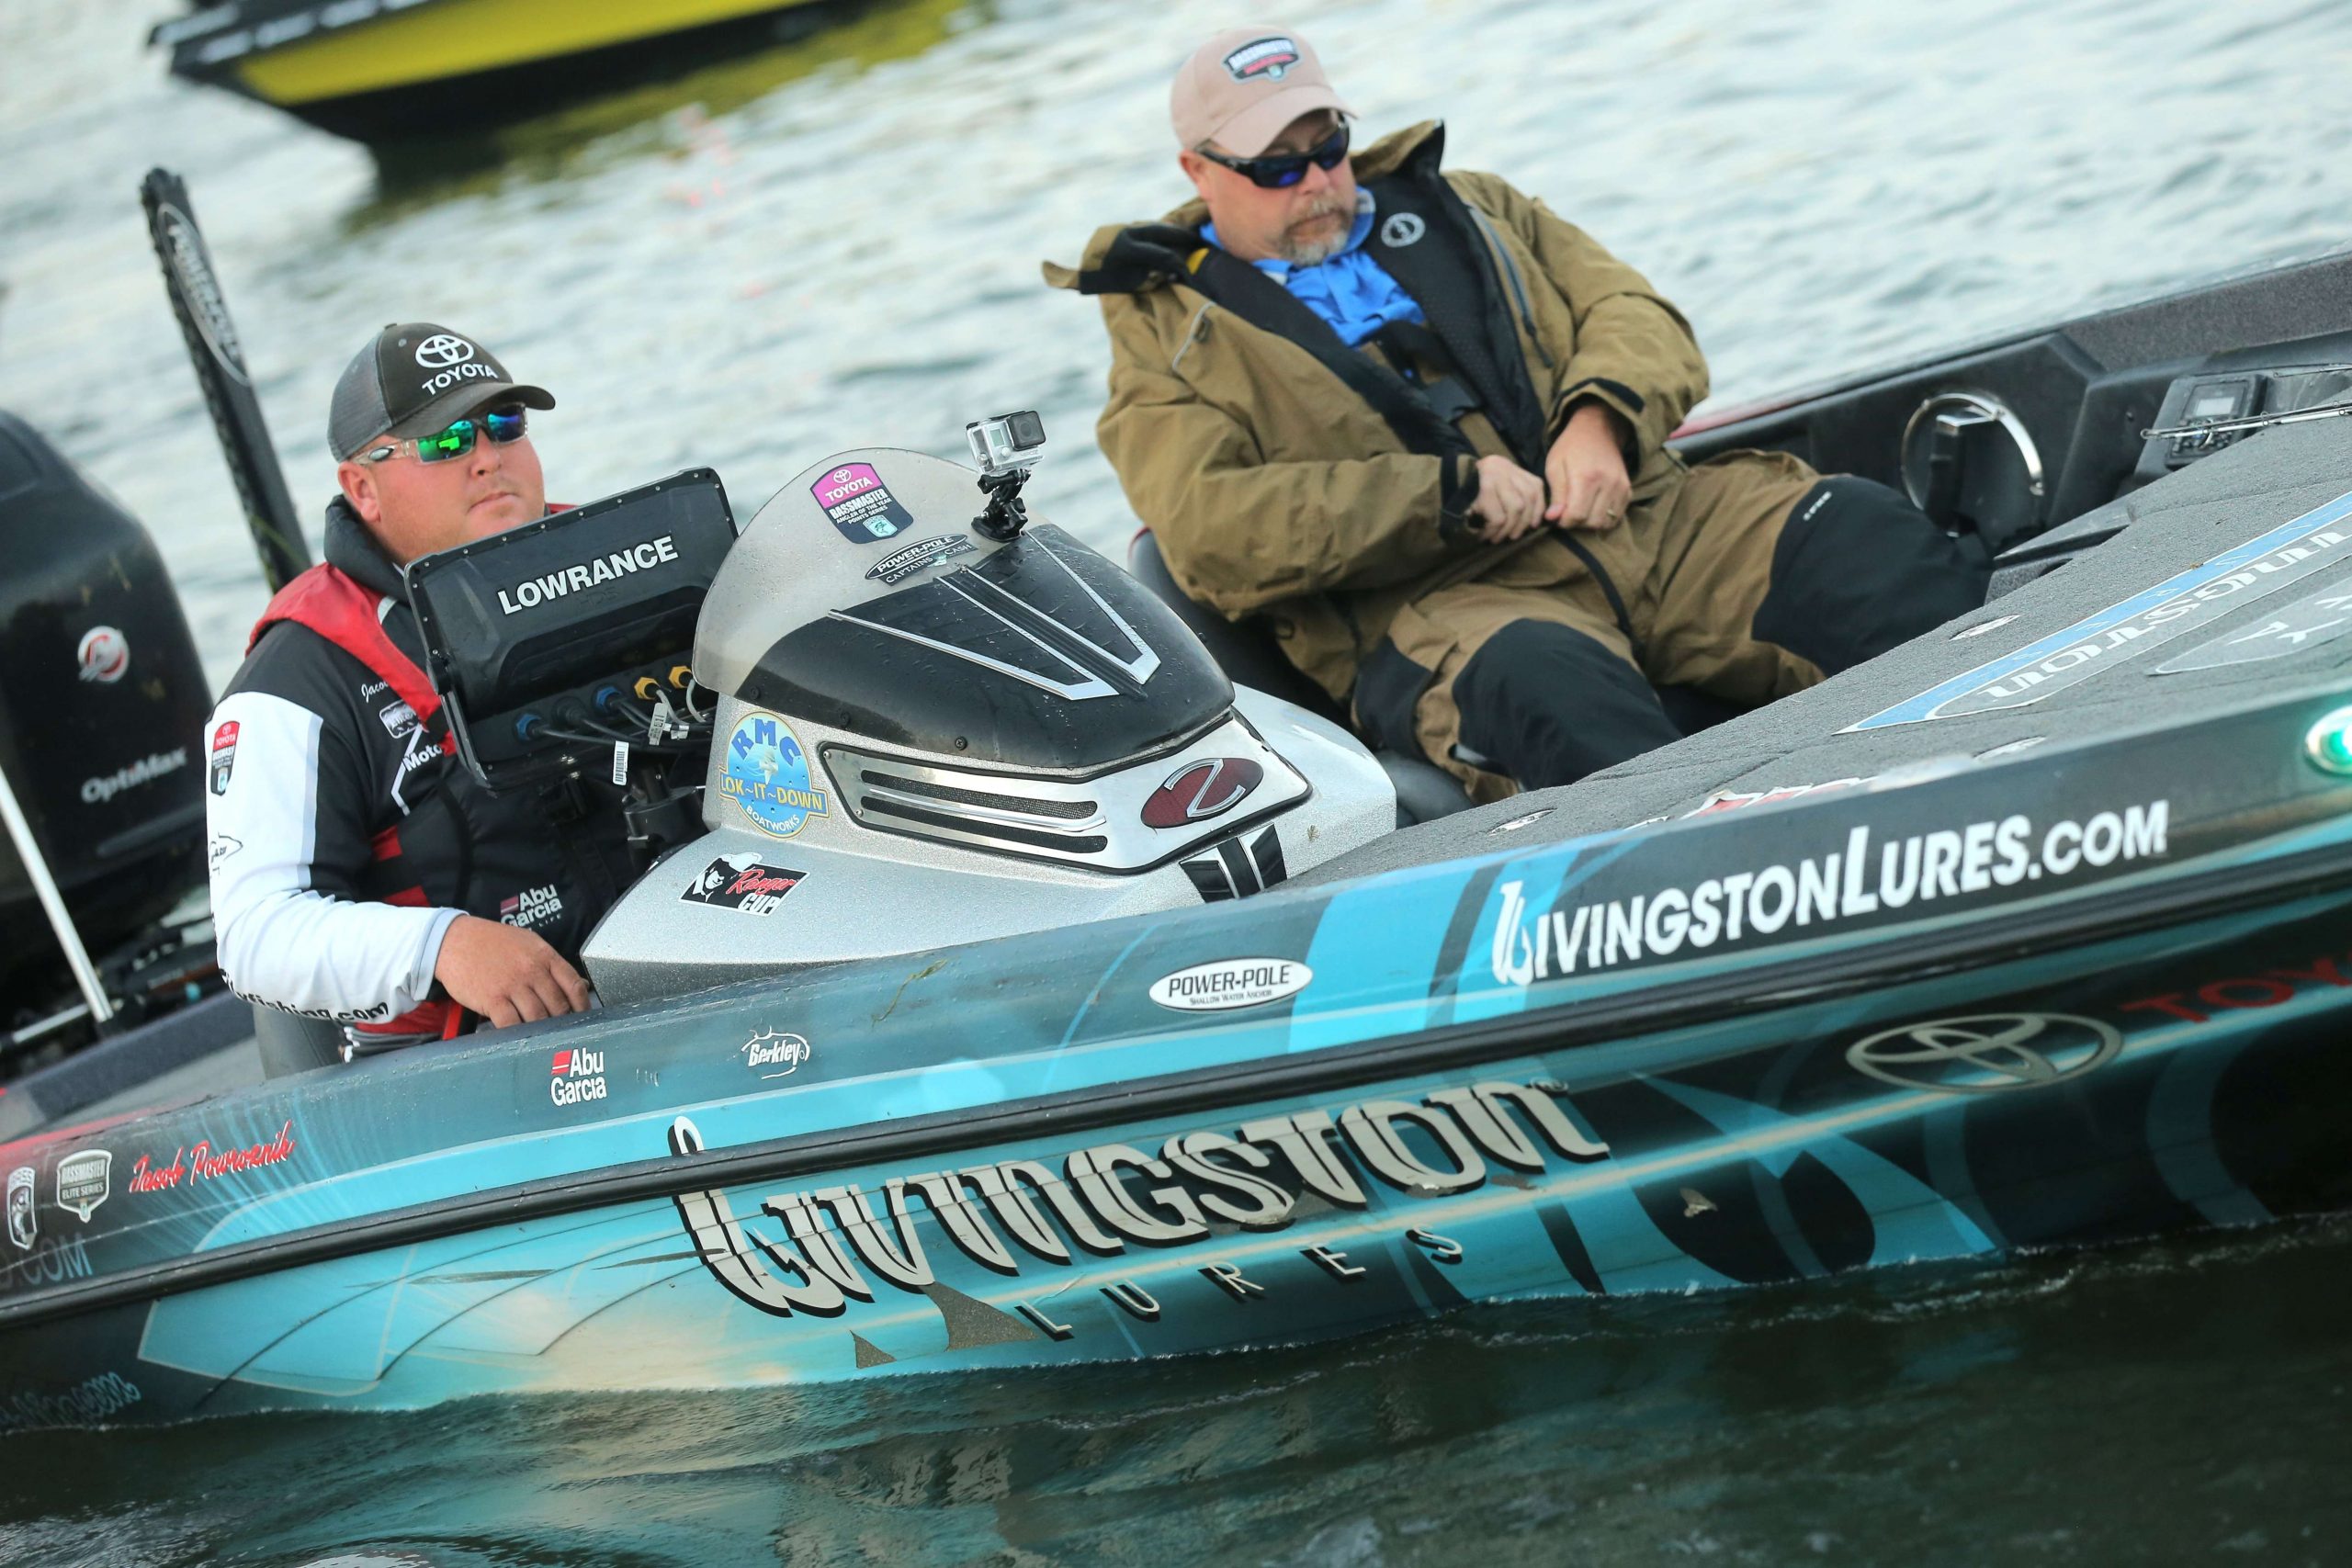 Jacob Powronik had the Carhartt Big Bass of 6-6 on Day 1 and sits in 5th with 20-4